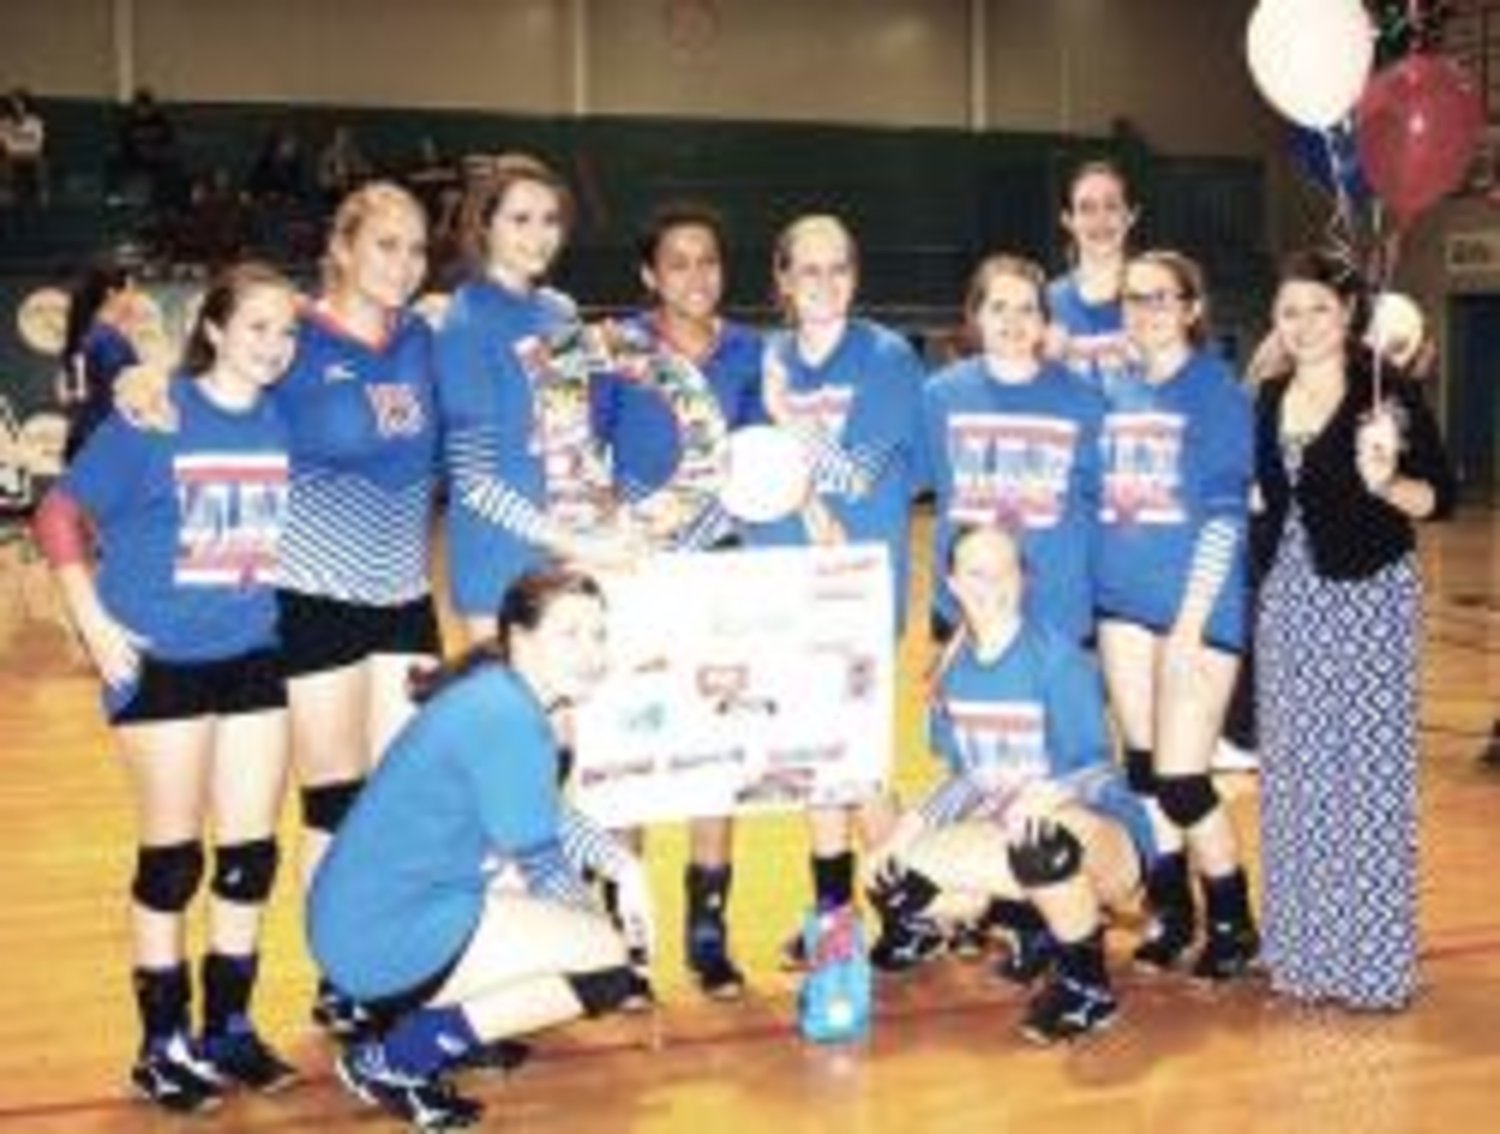 Senior Dawn Houck (holding volleyball in center) is surrounded by her teammates and Coach Ashlee Lingo honoring her on Senior Night last Friday after the Lady Bulldogs defeated Alba-Golden in a key district game.